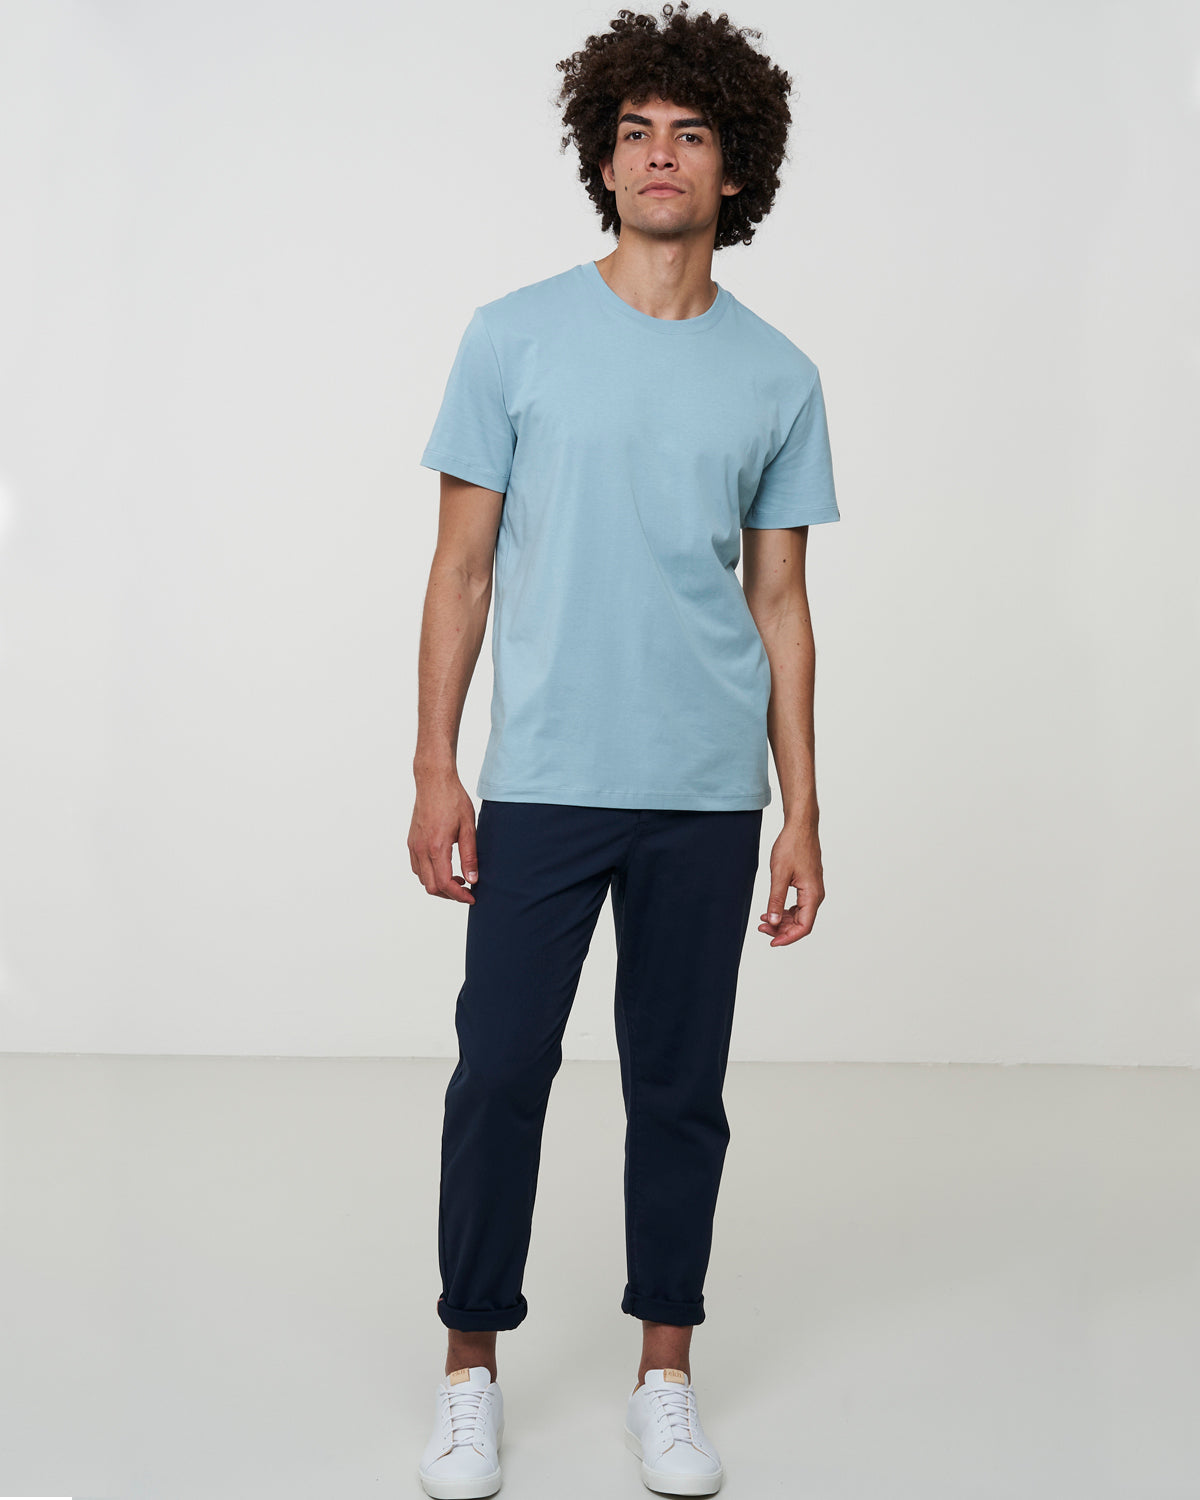 Recolution - T-Shirt Agave Mineral Blue - Nahmoo